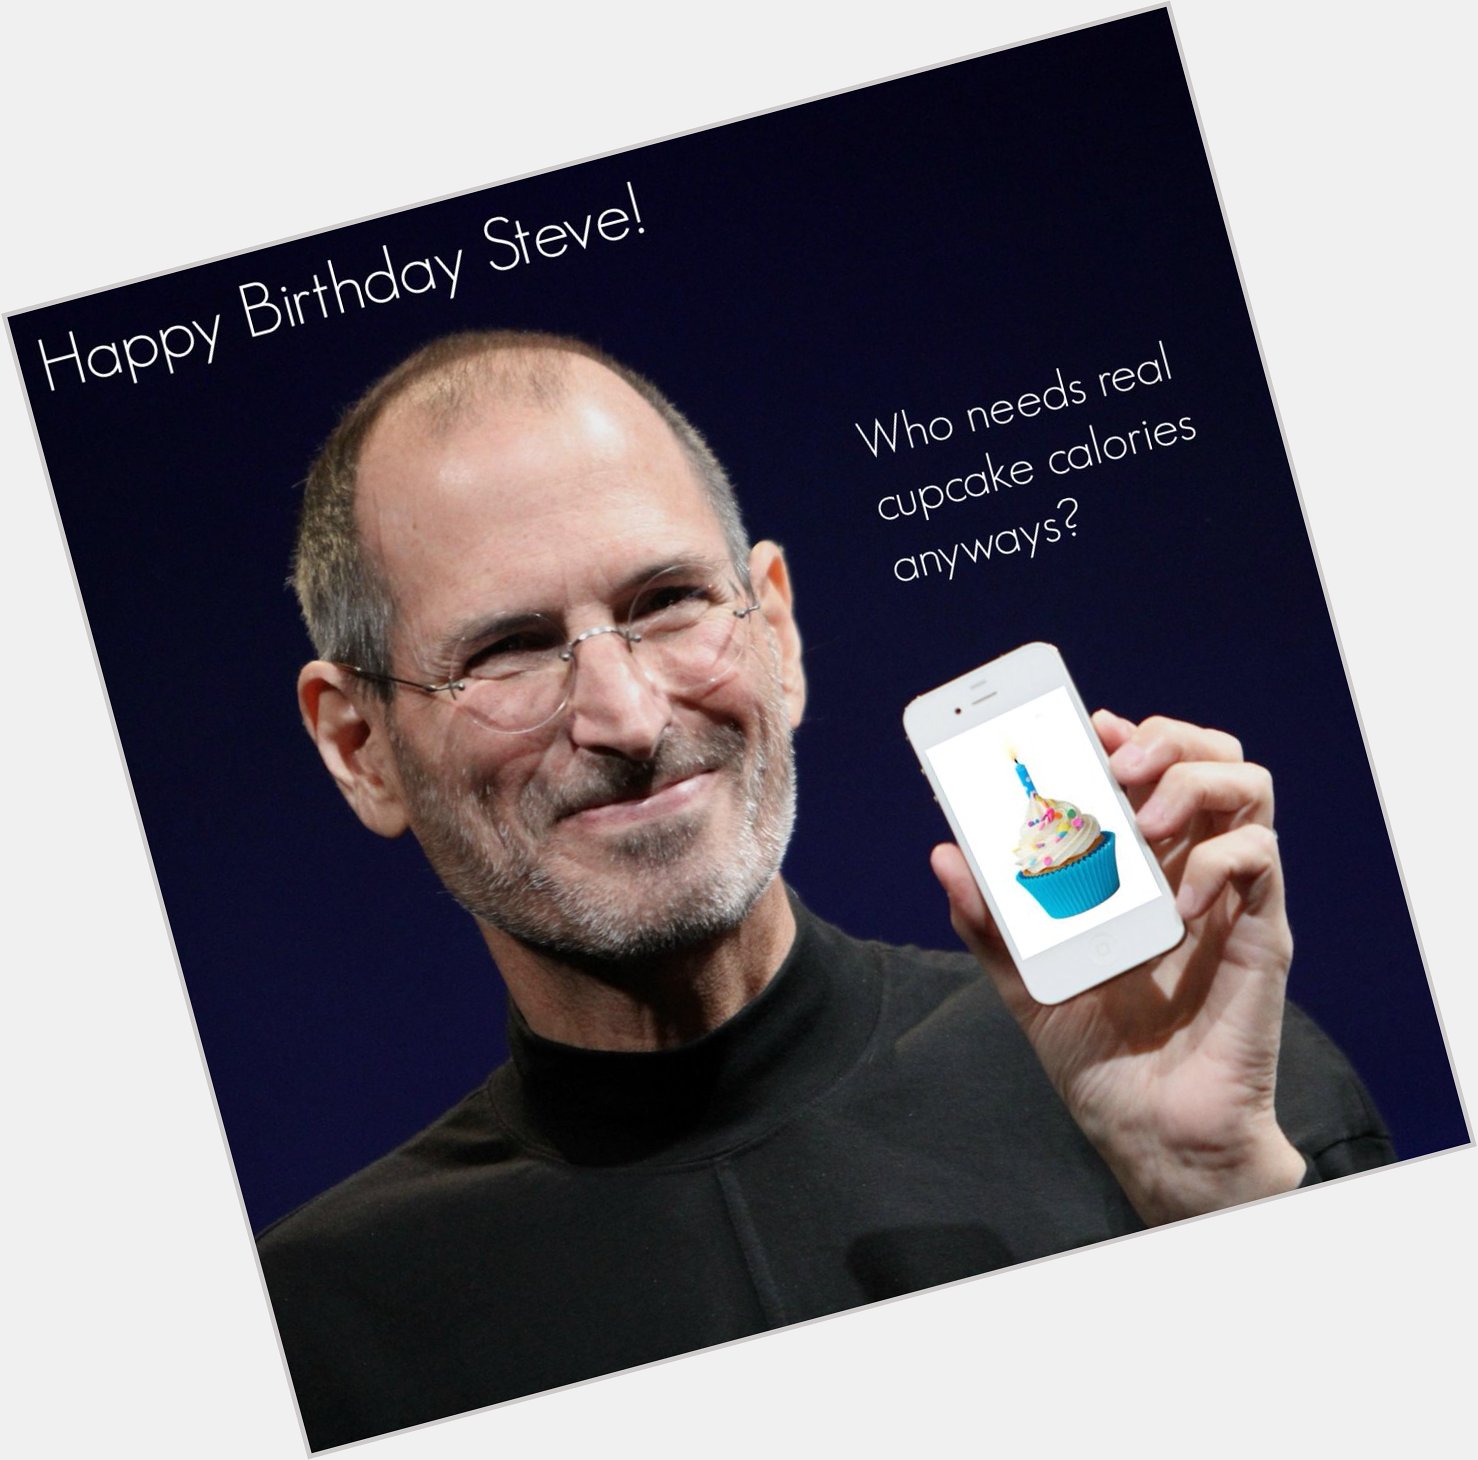  60 years ago today Steve Jobs power button was turned on! Happy Birthday Steve! Rest in peace. 